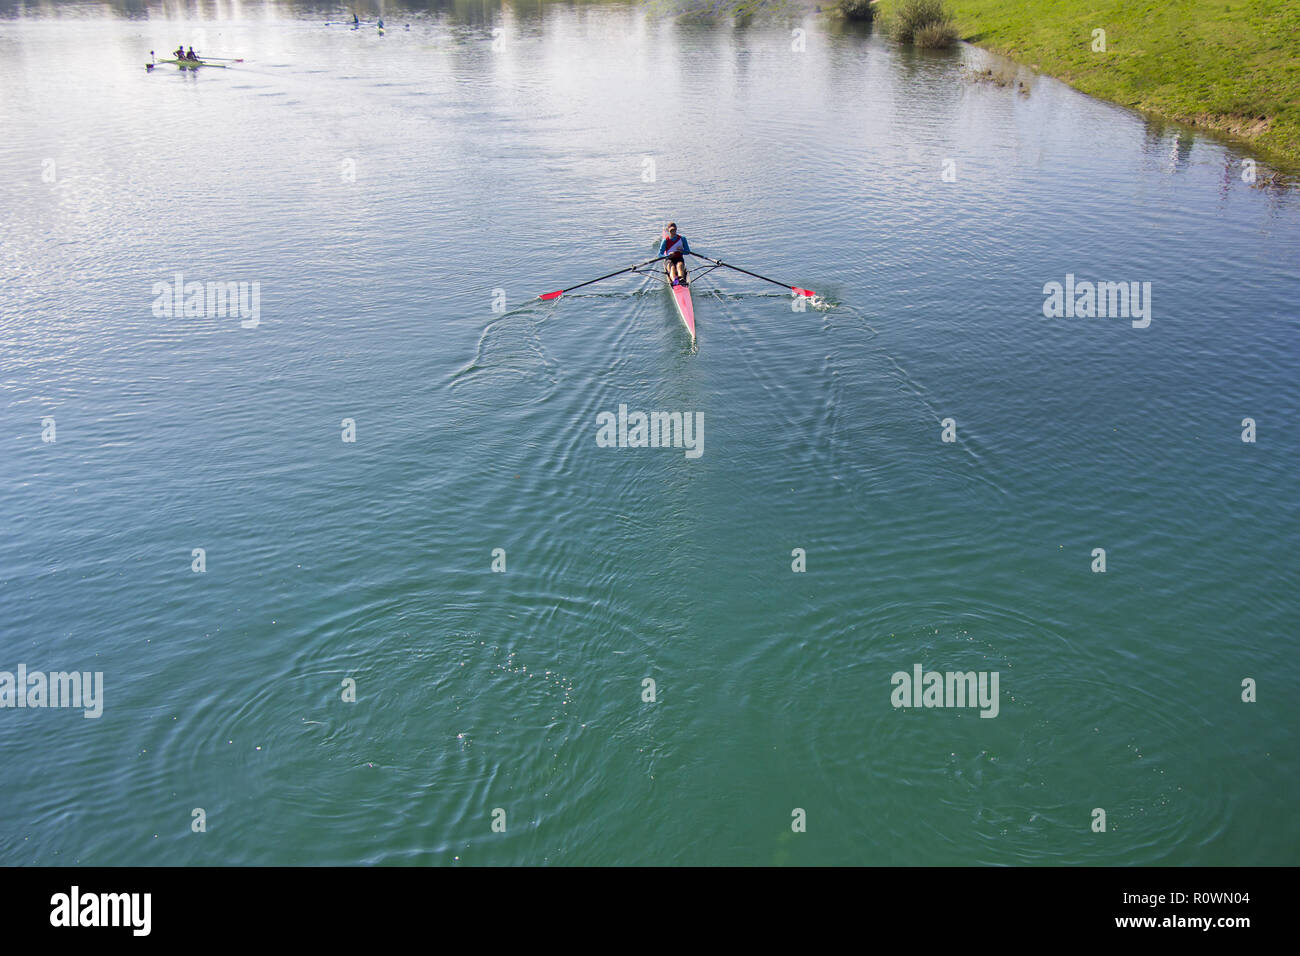 Single scull rowing competitor, rowing race one rower Stock Photo